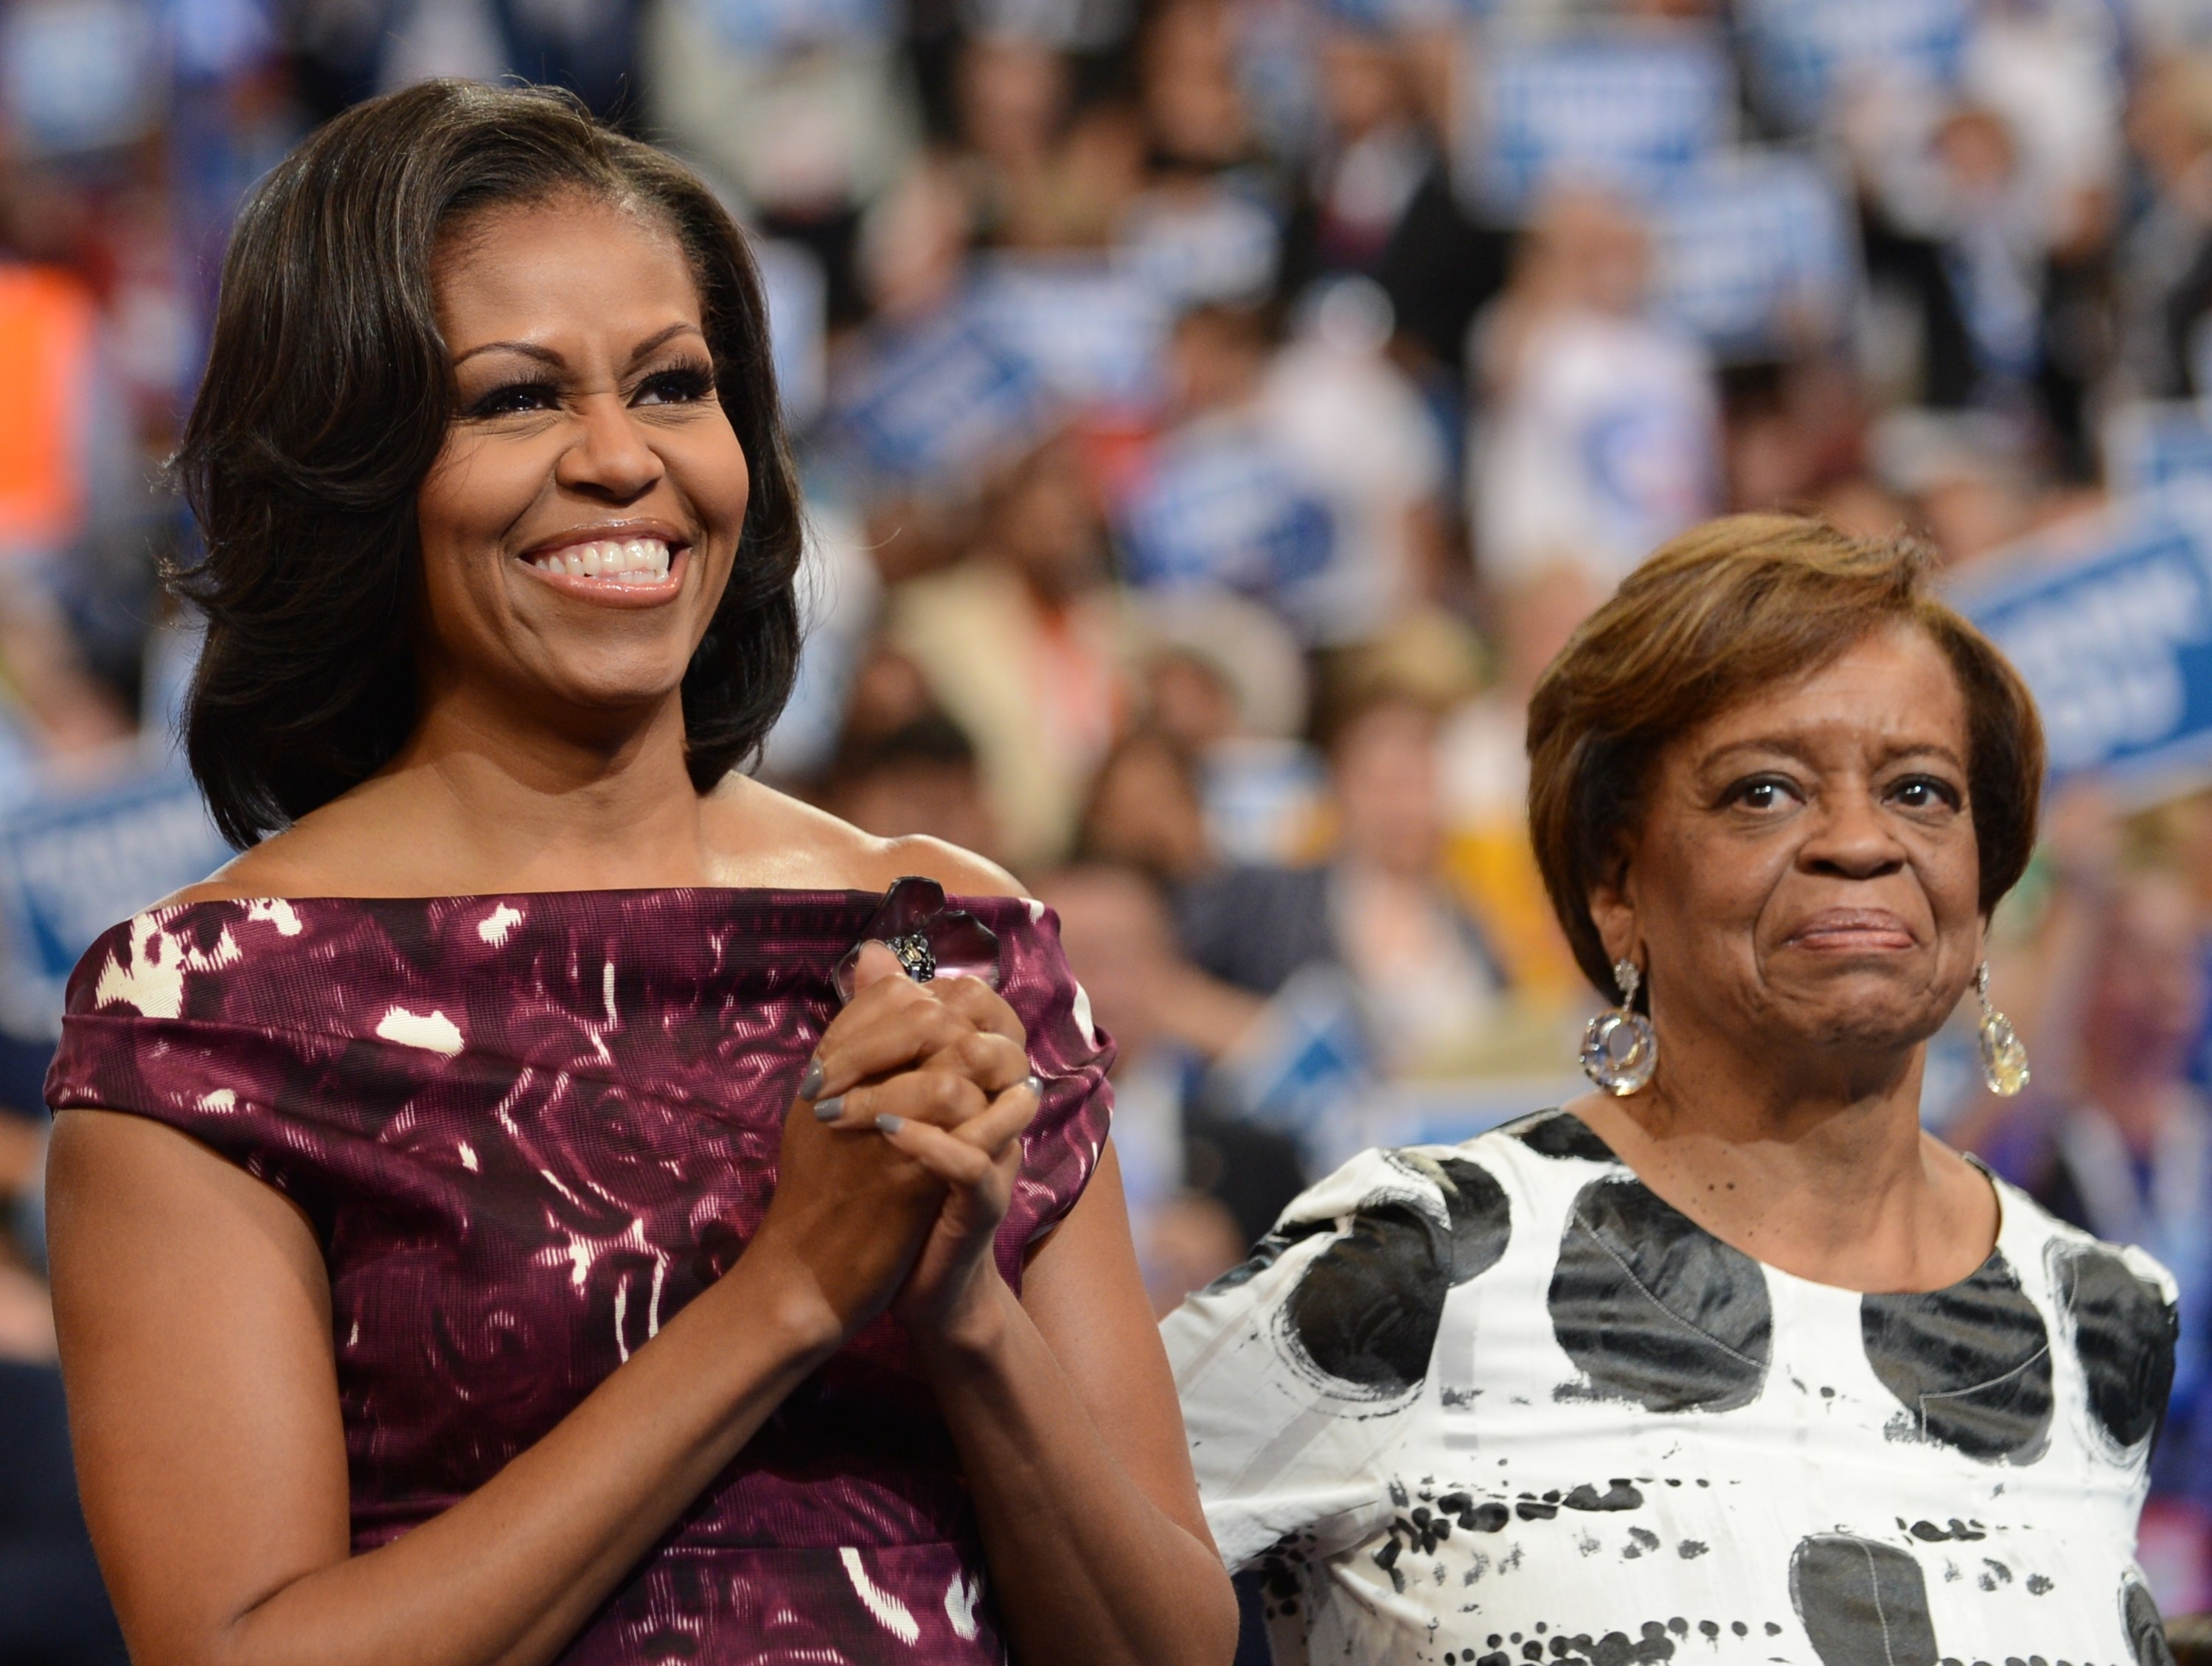 Michelle stands next to her mom at an event